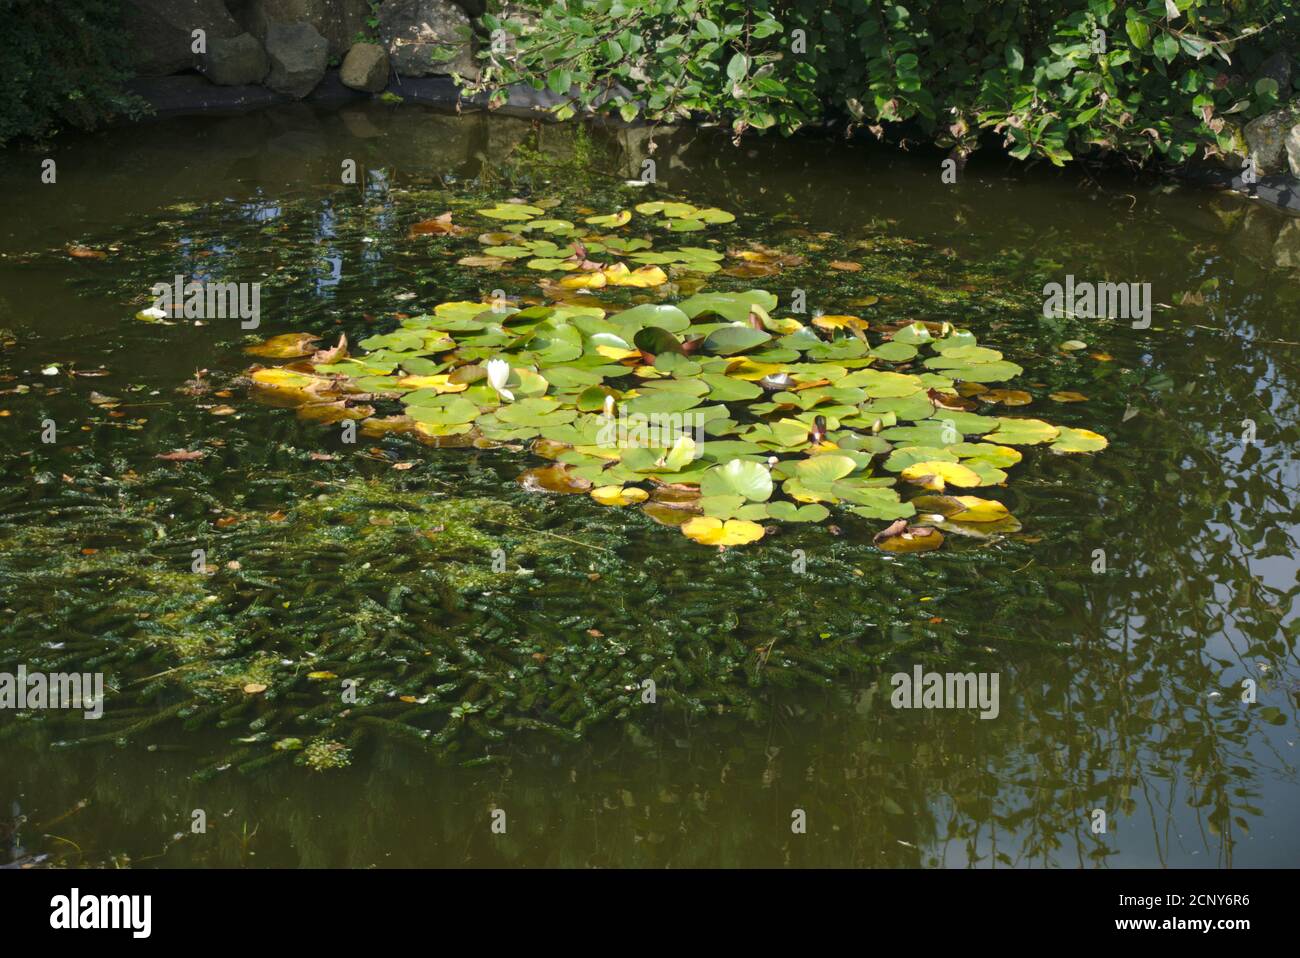 Water lilies (nymphaeaceae) on the surface of an artificial garden pond. Stock Photo